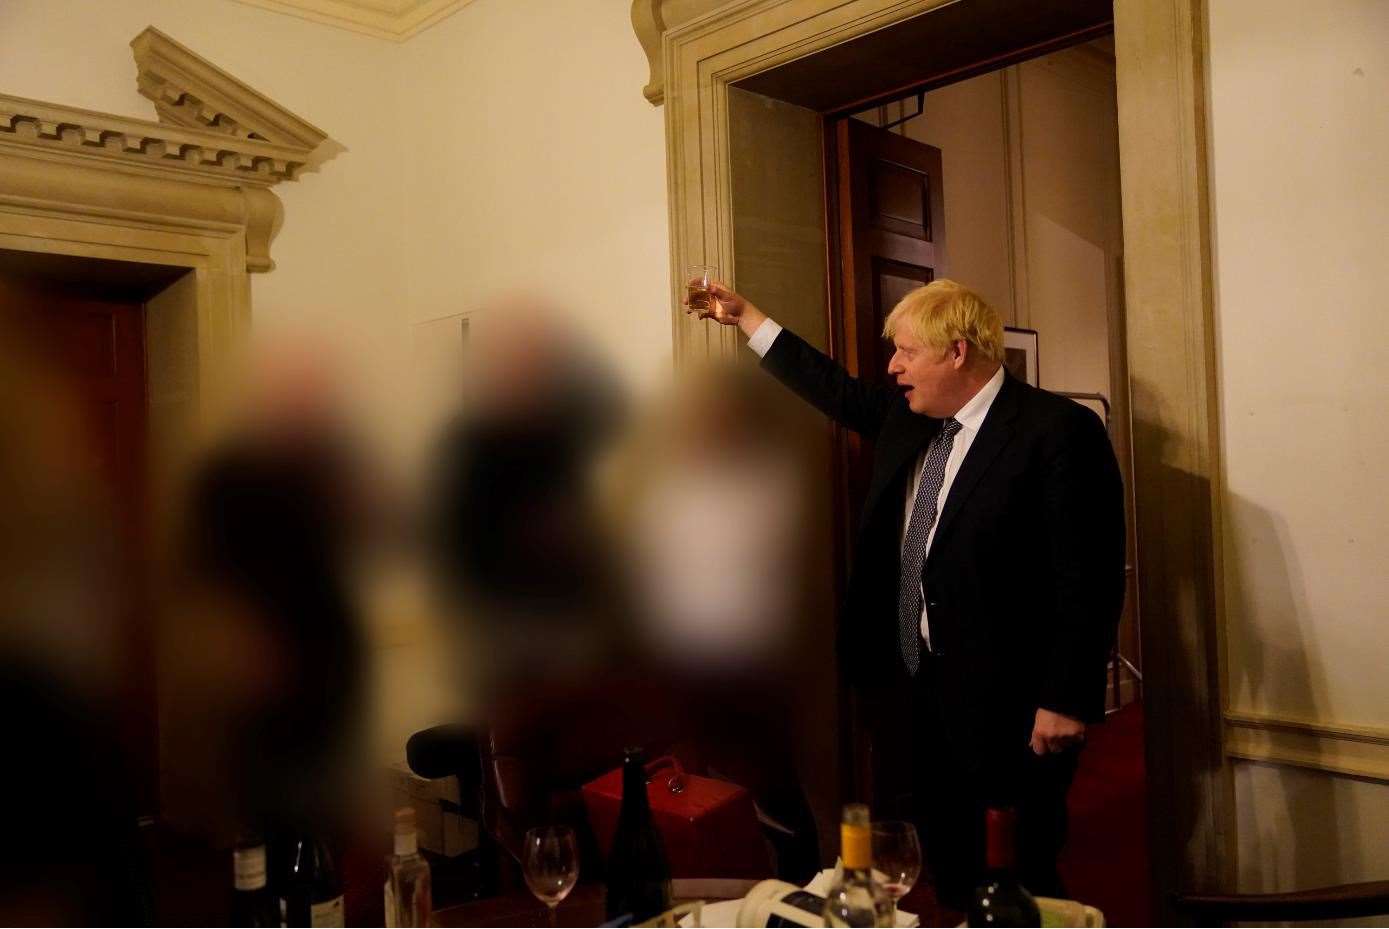 Boris Johnson at the party on November 13 2020 (Sue Gray Report/Cabinet Office/PA)